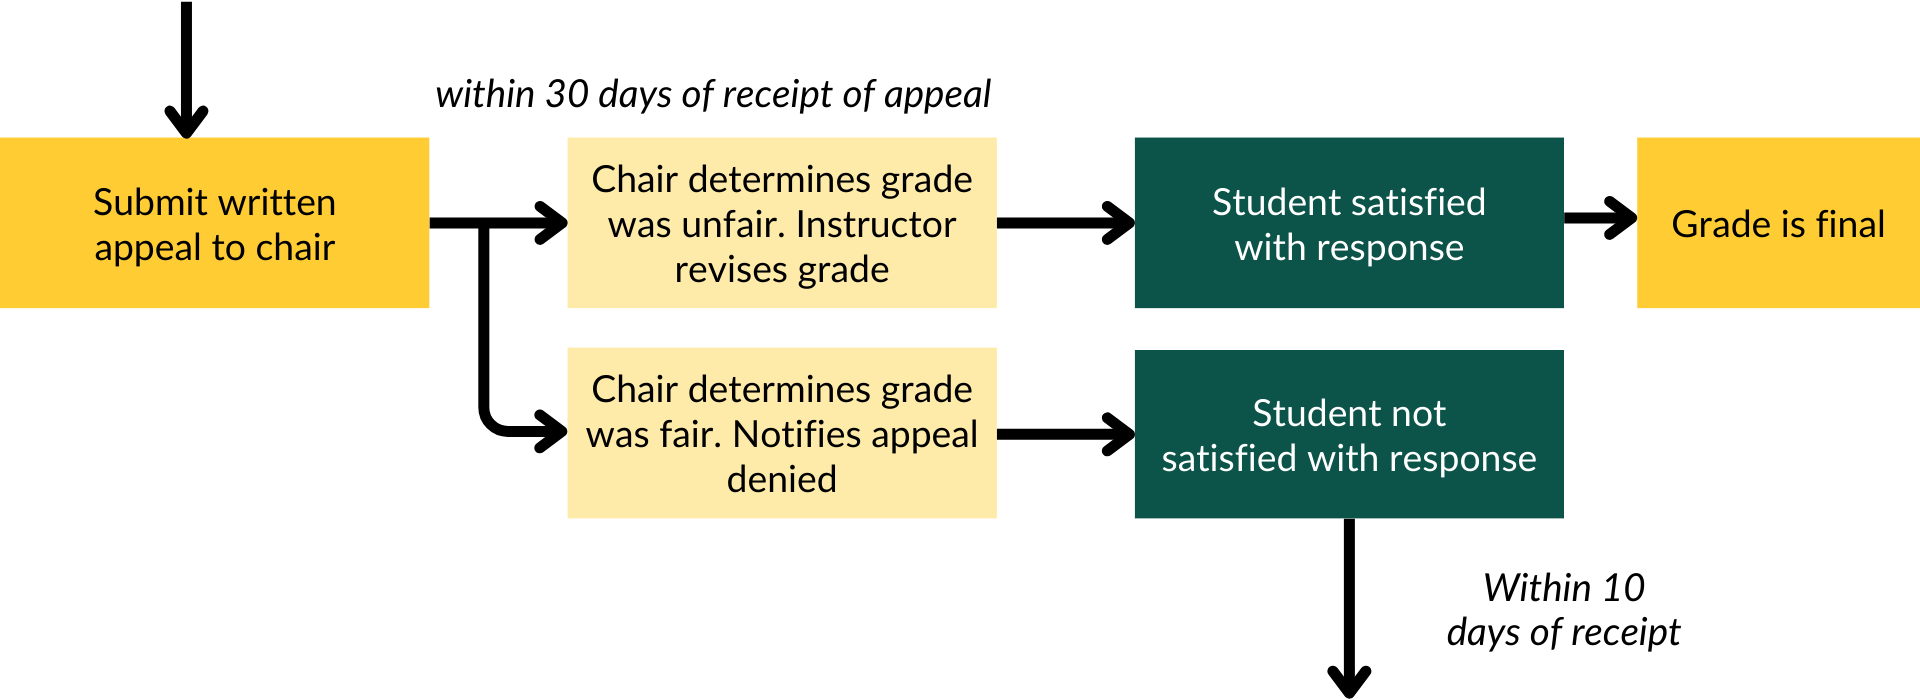 Grade appeal process for chair